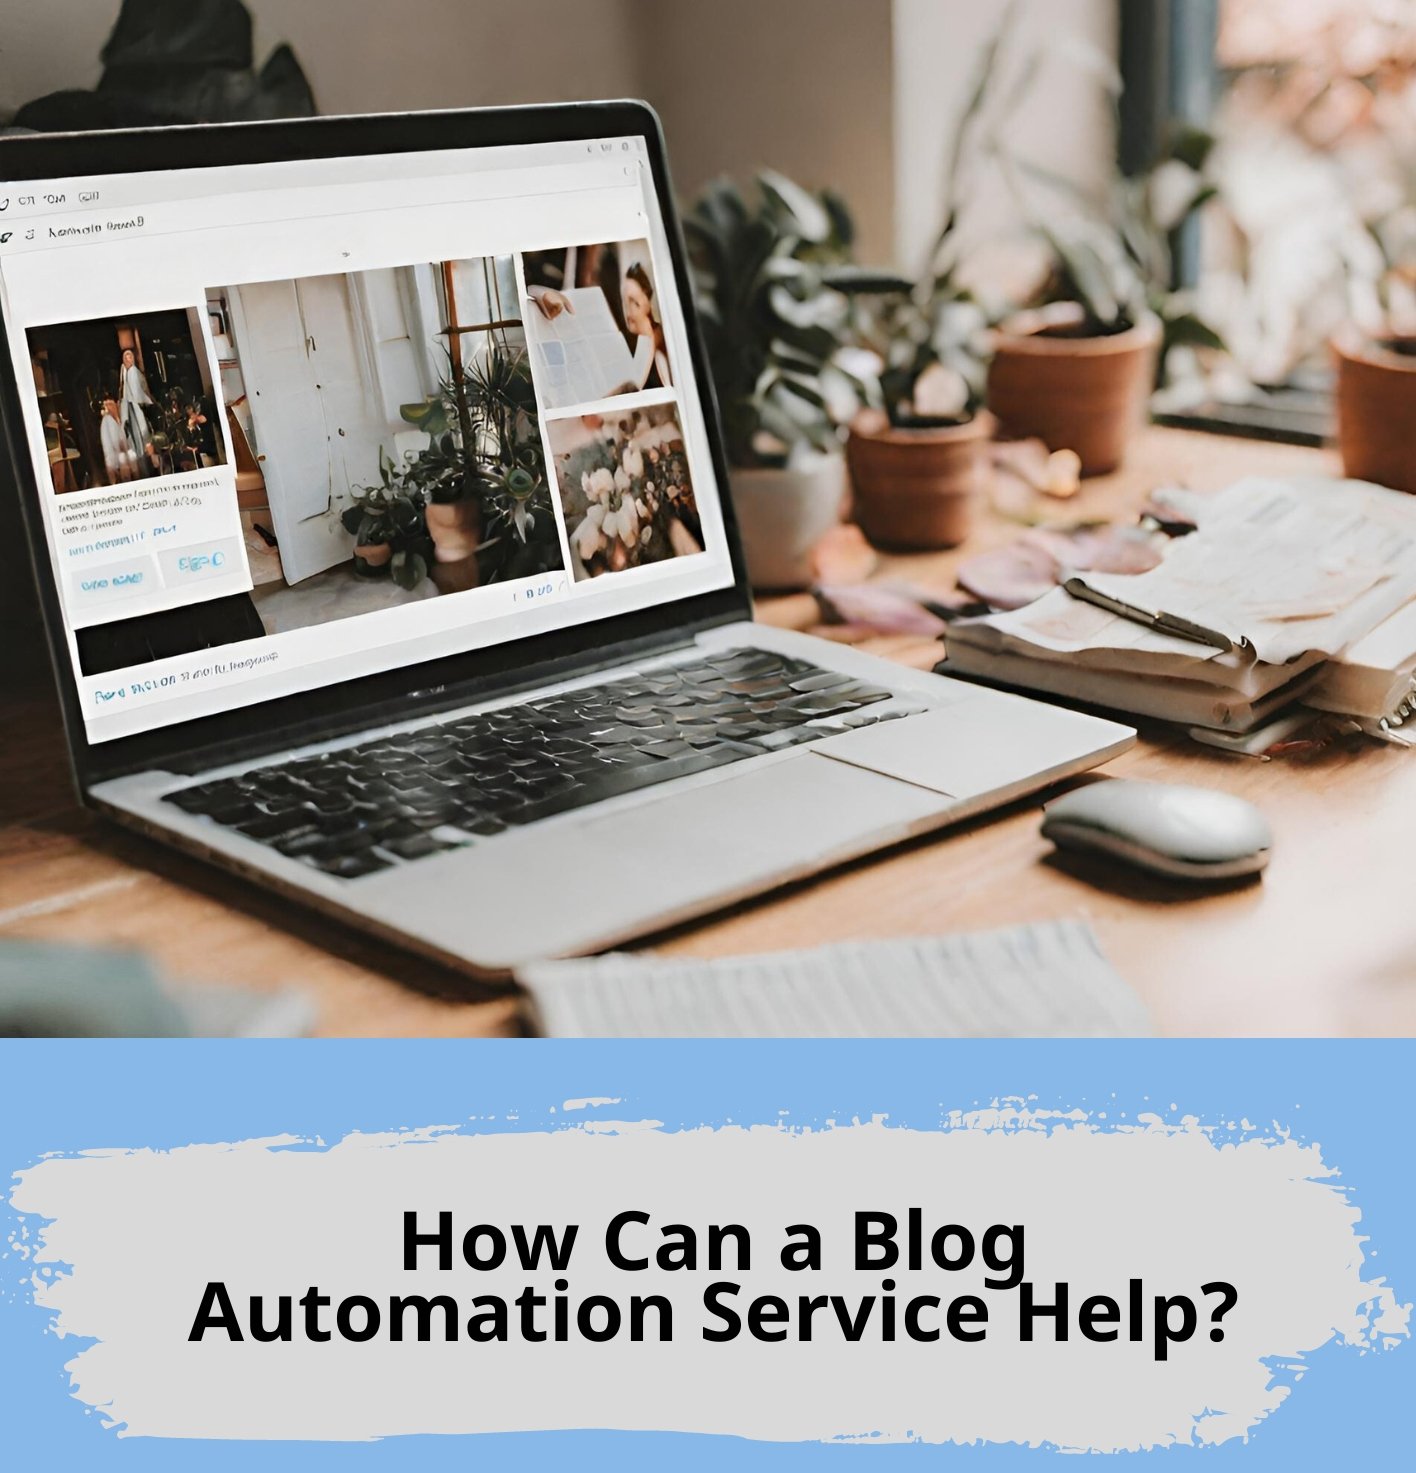 How Can a Blog Automation Service Help?